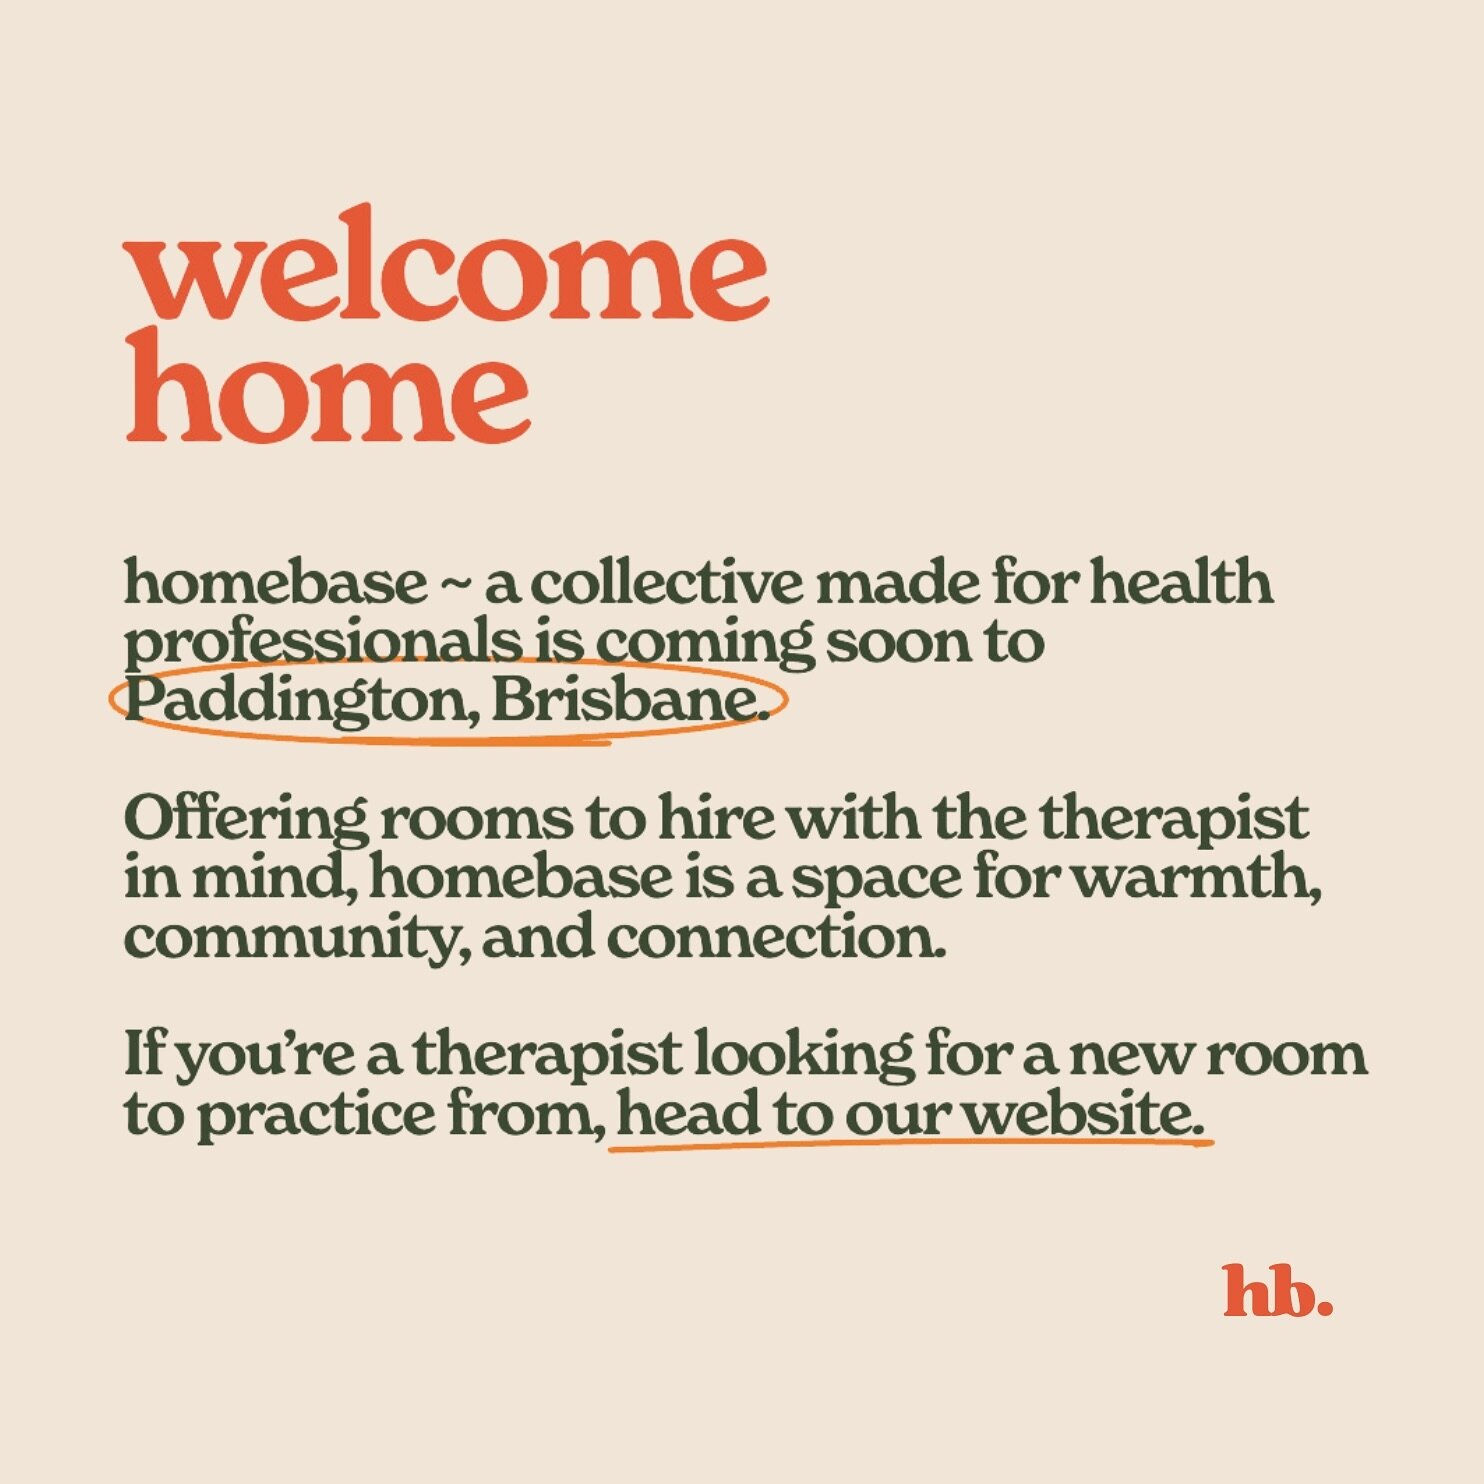 𝙉𝙤𝙬 𝙖𝙘𝙘𝙚𝙥𝙩𝙞𝙣𝙜 𝙚𝙭𝙥𝙧𝙚𝙨𝙨𝙞𝙤𝙣𝙨 𝙤𝙛 𝙞𝙣𝙩𝙚𝙧𝙚𝙨𝙩 🧡

We are thrilled to announce that homebase is now accepting expressions of interest through our website for consult room rental (link in bio) ✨
If you&rsquo;re a therapist sear